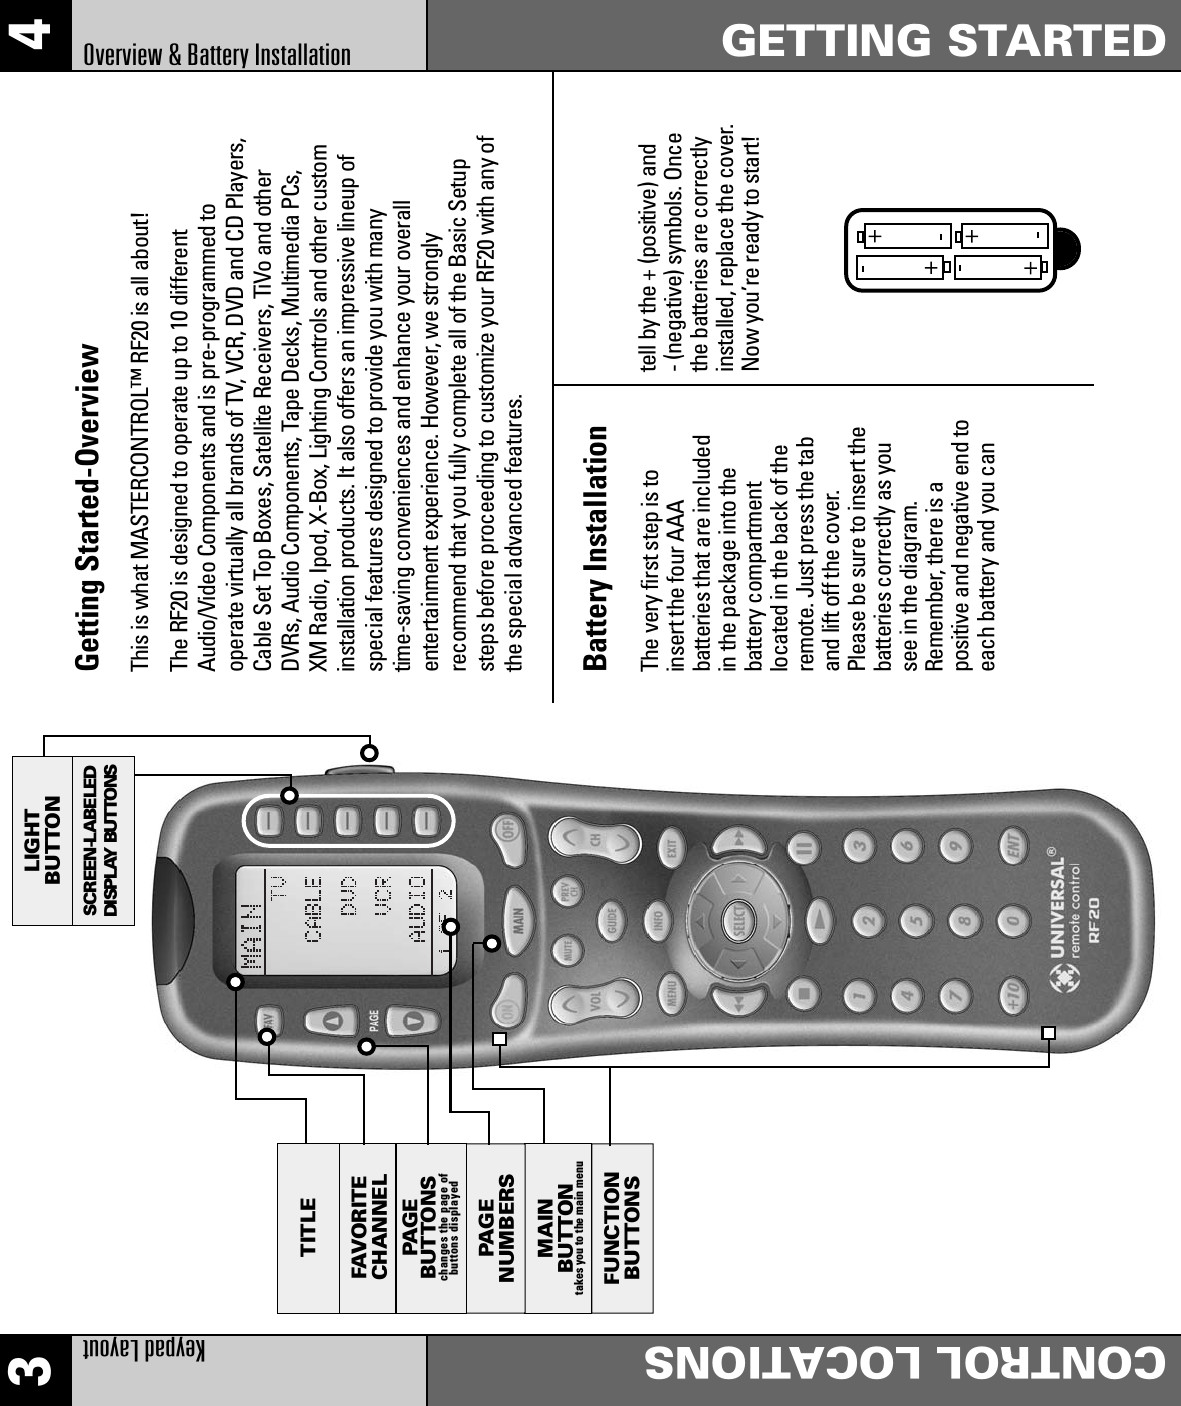 3 4Keypad LayoutCONTROL LOCATIONSGETTING STARTEDOverview &amp; Battery InstallationBattery InstallationThe very first step is toinsert the four AAAbatteries that are includedin the package into thebattery compartmentlocated in the back of theremote. Just press the taband lift off the cover.Please be sure to insert thebatteries correctly as yousee in the diagram.Remember, there is apositive and negative end toeach battery and you cantell by the + (positive) and- (negative) symbols. Oncethe batteries are correctlyinstalled, replace the cover.Now you’re ready to start!LIGHTBUTTONSCREEN-LABELEDDISPLAY BUTTONSMAINBUTTONtakes you to the main menuFUNCTIONBUTTONSFAVORITECHANNELPAGENUMBERSTITLEPAGE BUTTONSchanges the page of buttons displayedGetting Started-OverviewThis is what MASTERCONTROL™ RF20 is all about!The RF20 is designed to operate up to 10 differentAudio/Video Components and is pre-programmed tooperate virtually all brands of TV, VCR, DVD and CD Players,Cable Set Top Boxes, Satellite Receivers, TiVo and otherDVRs, Audio Components, Tape Decks, Multimedia PCs,XM Radio, Ipod, X-Box, Lighting Controls and other custominstallation products. It also offers an impressive lineup ofspecial features designed to provide you with manytime-saving conveniences and enhance your overallentertainment experience. However, we stronglyrecommend that you fully complete all of the Basic Setupsteps before proceeding to customize your RF20 with any ofthe special advanced features.